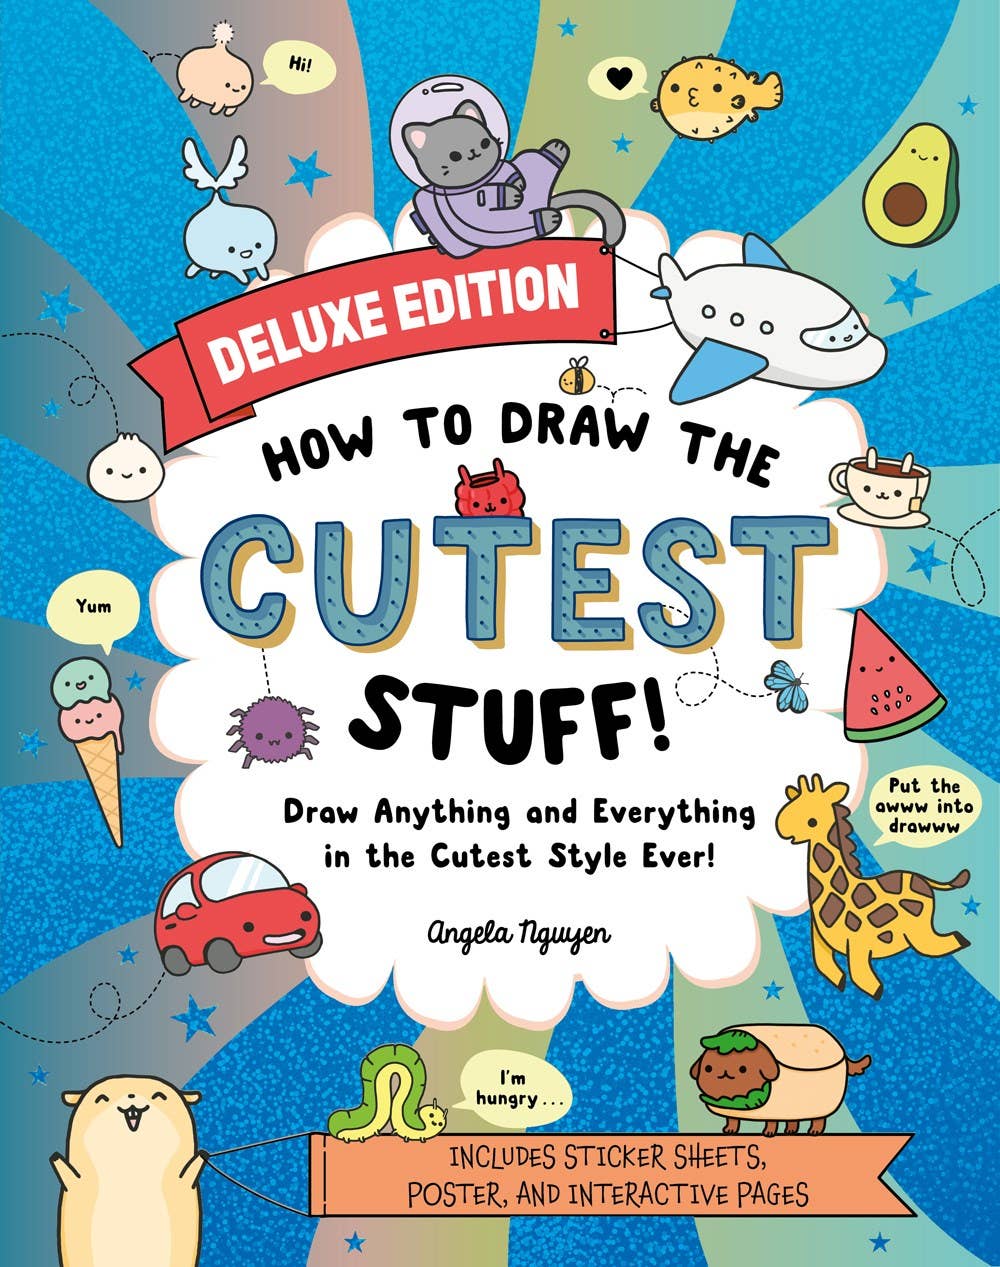 How to Draw the Cutest Stuff | Deluxe Edition